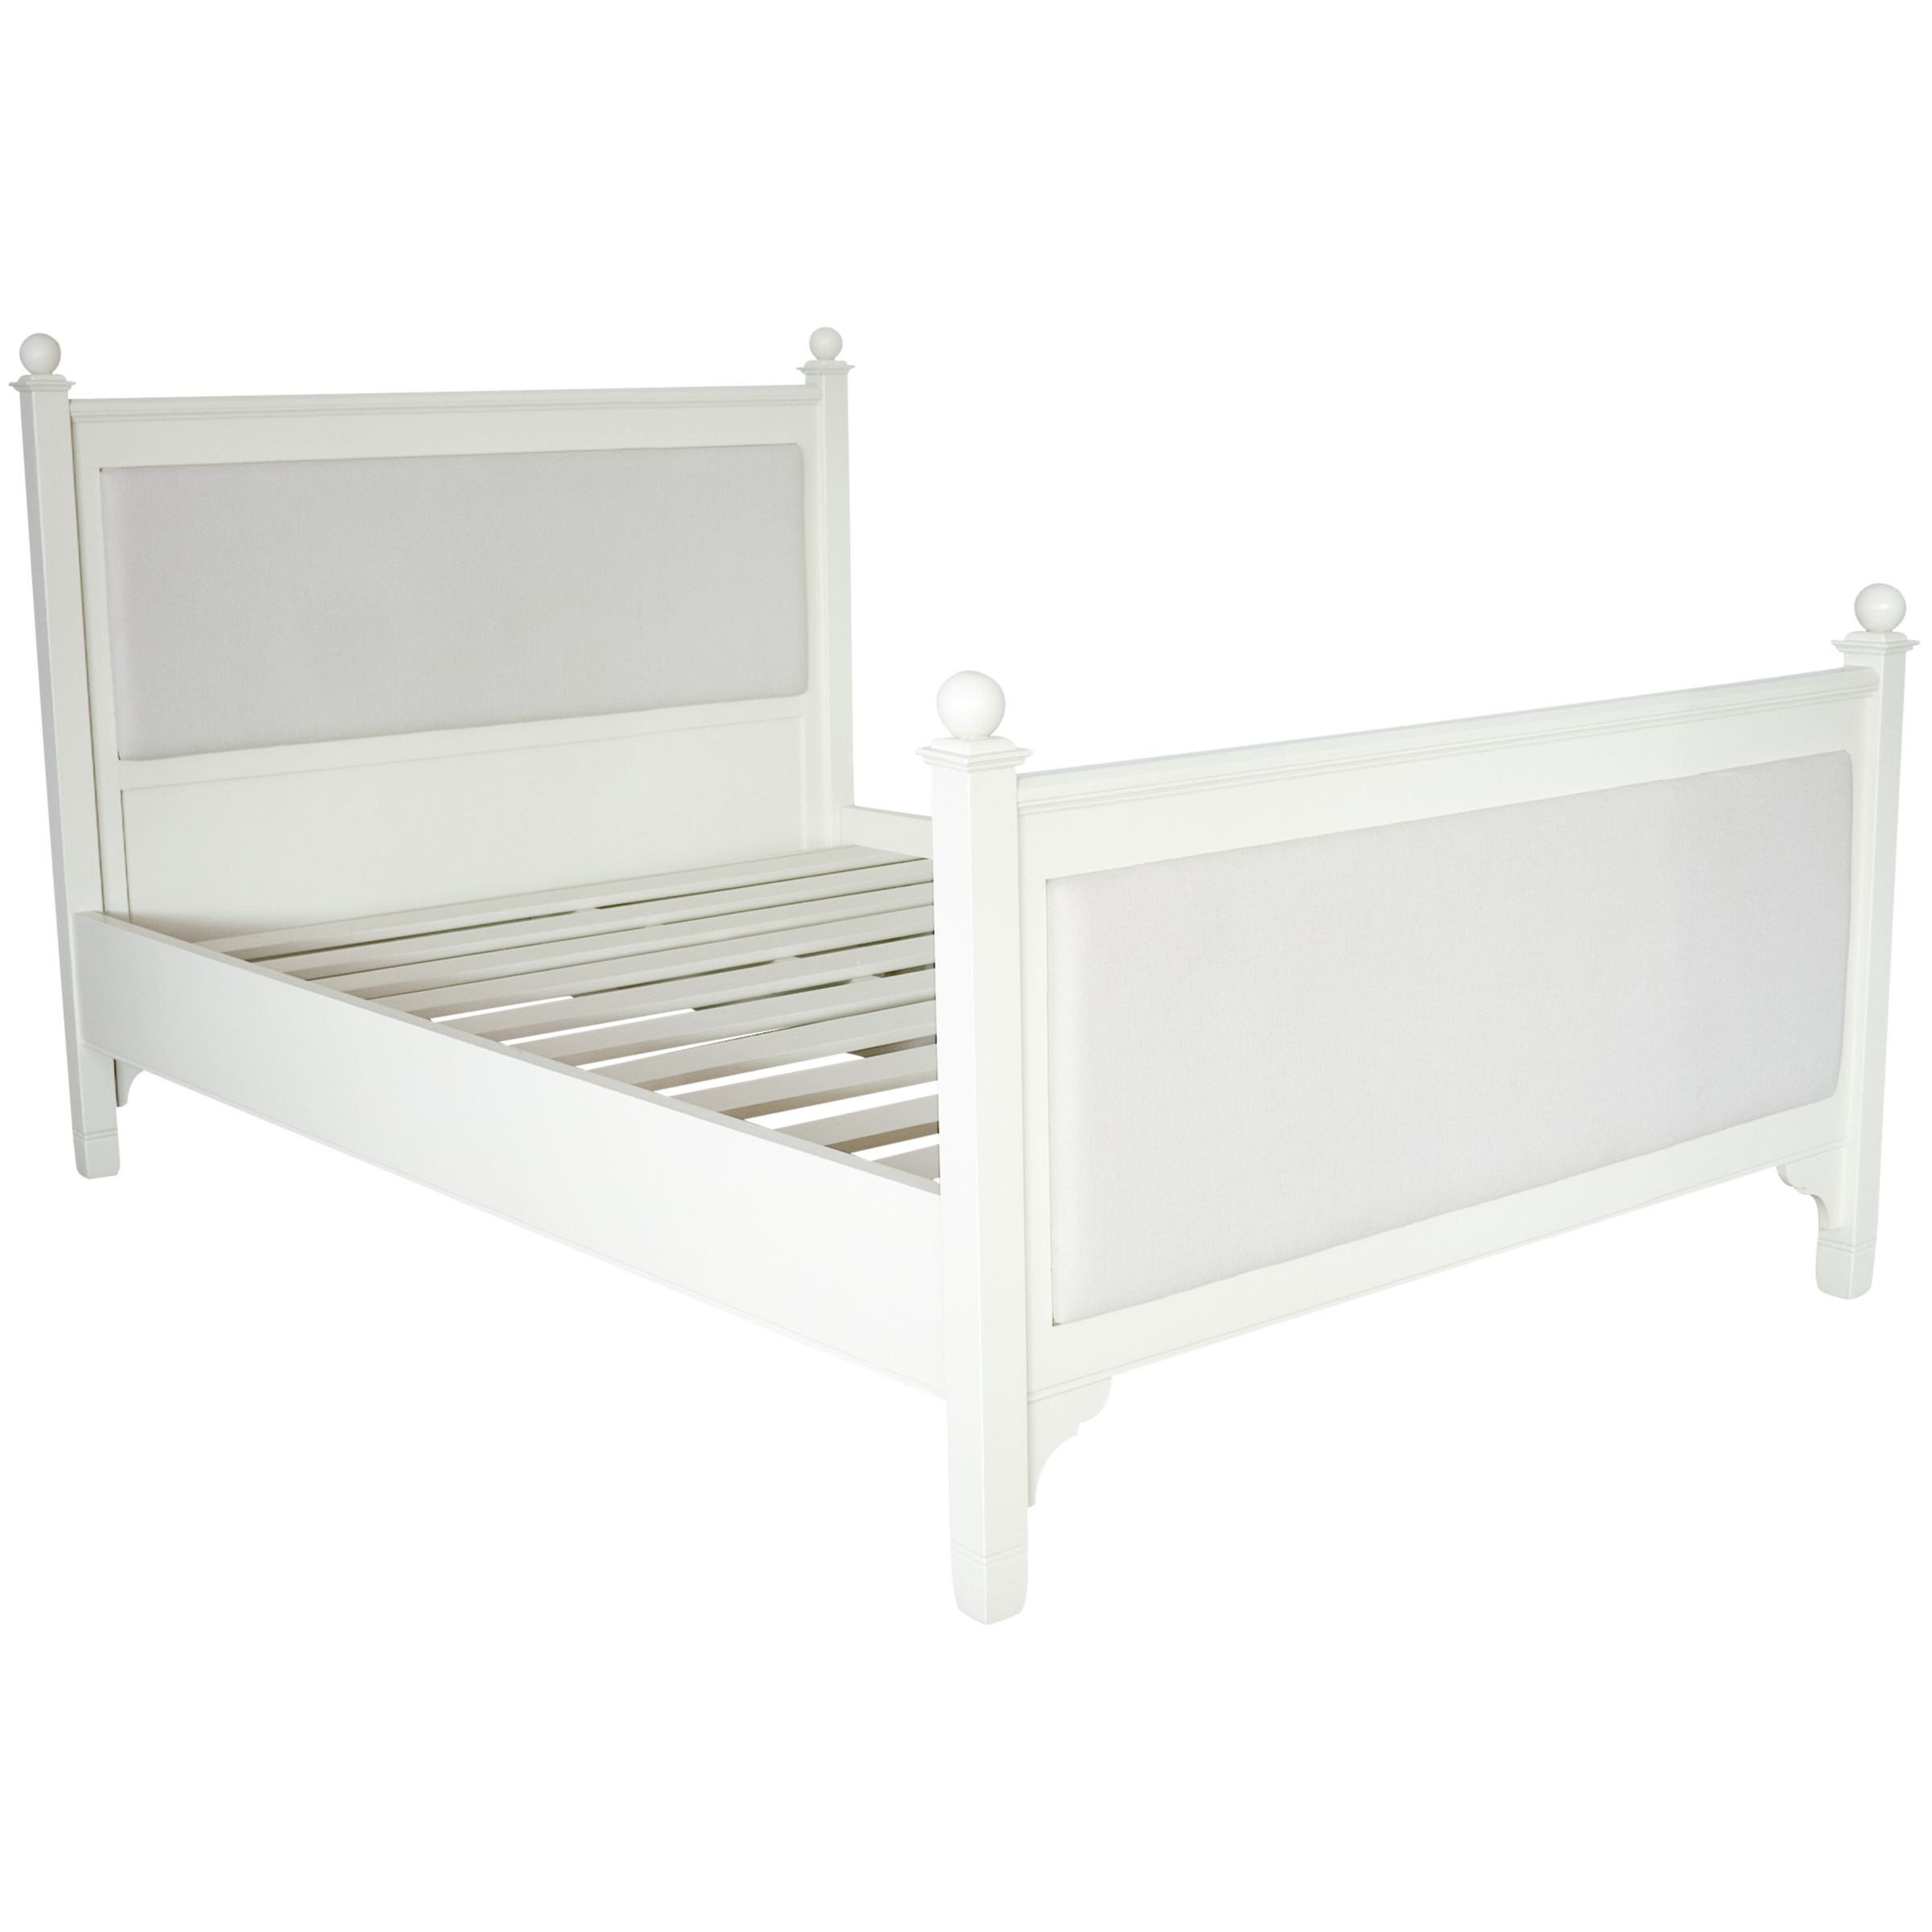 Chichester Bedstead, Double